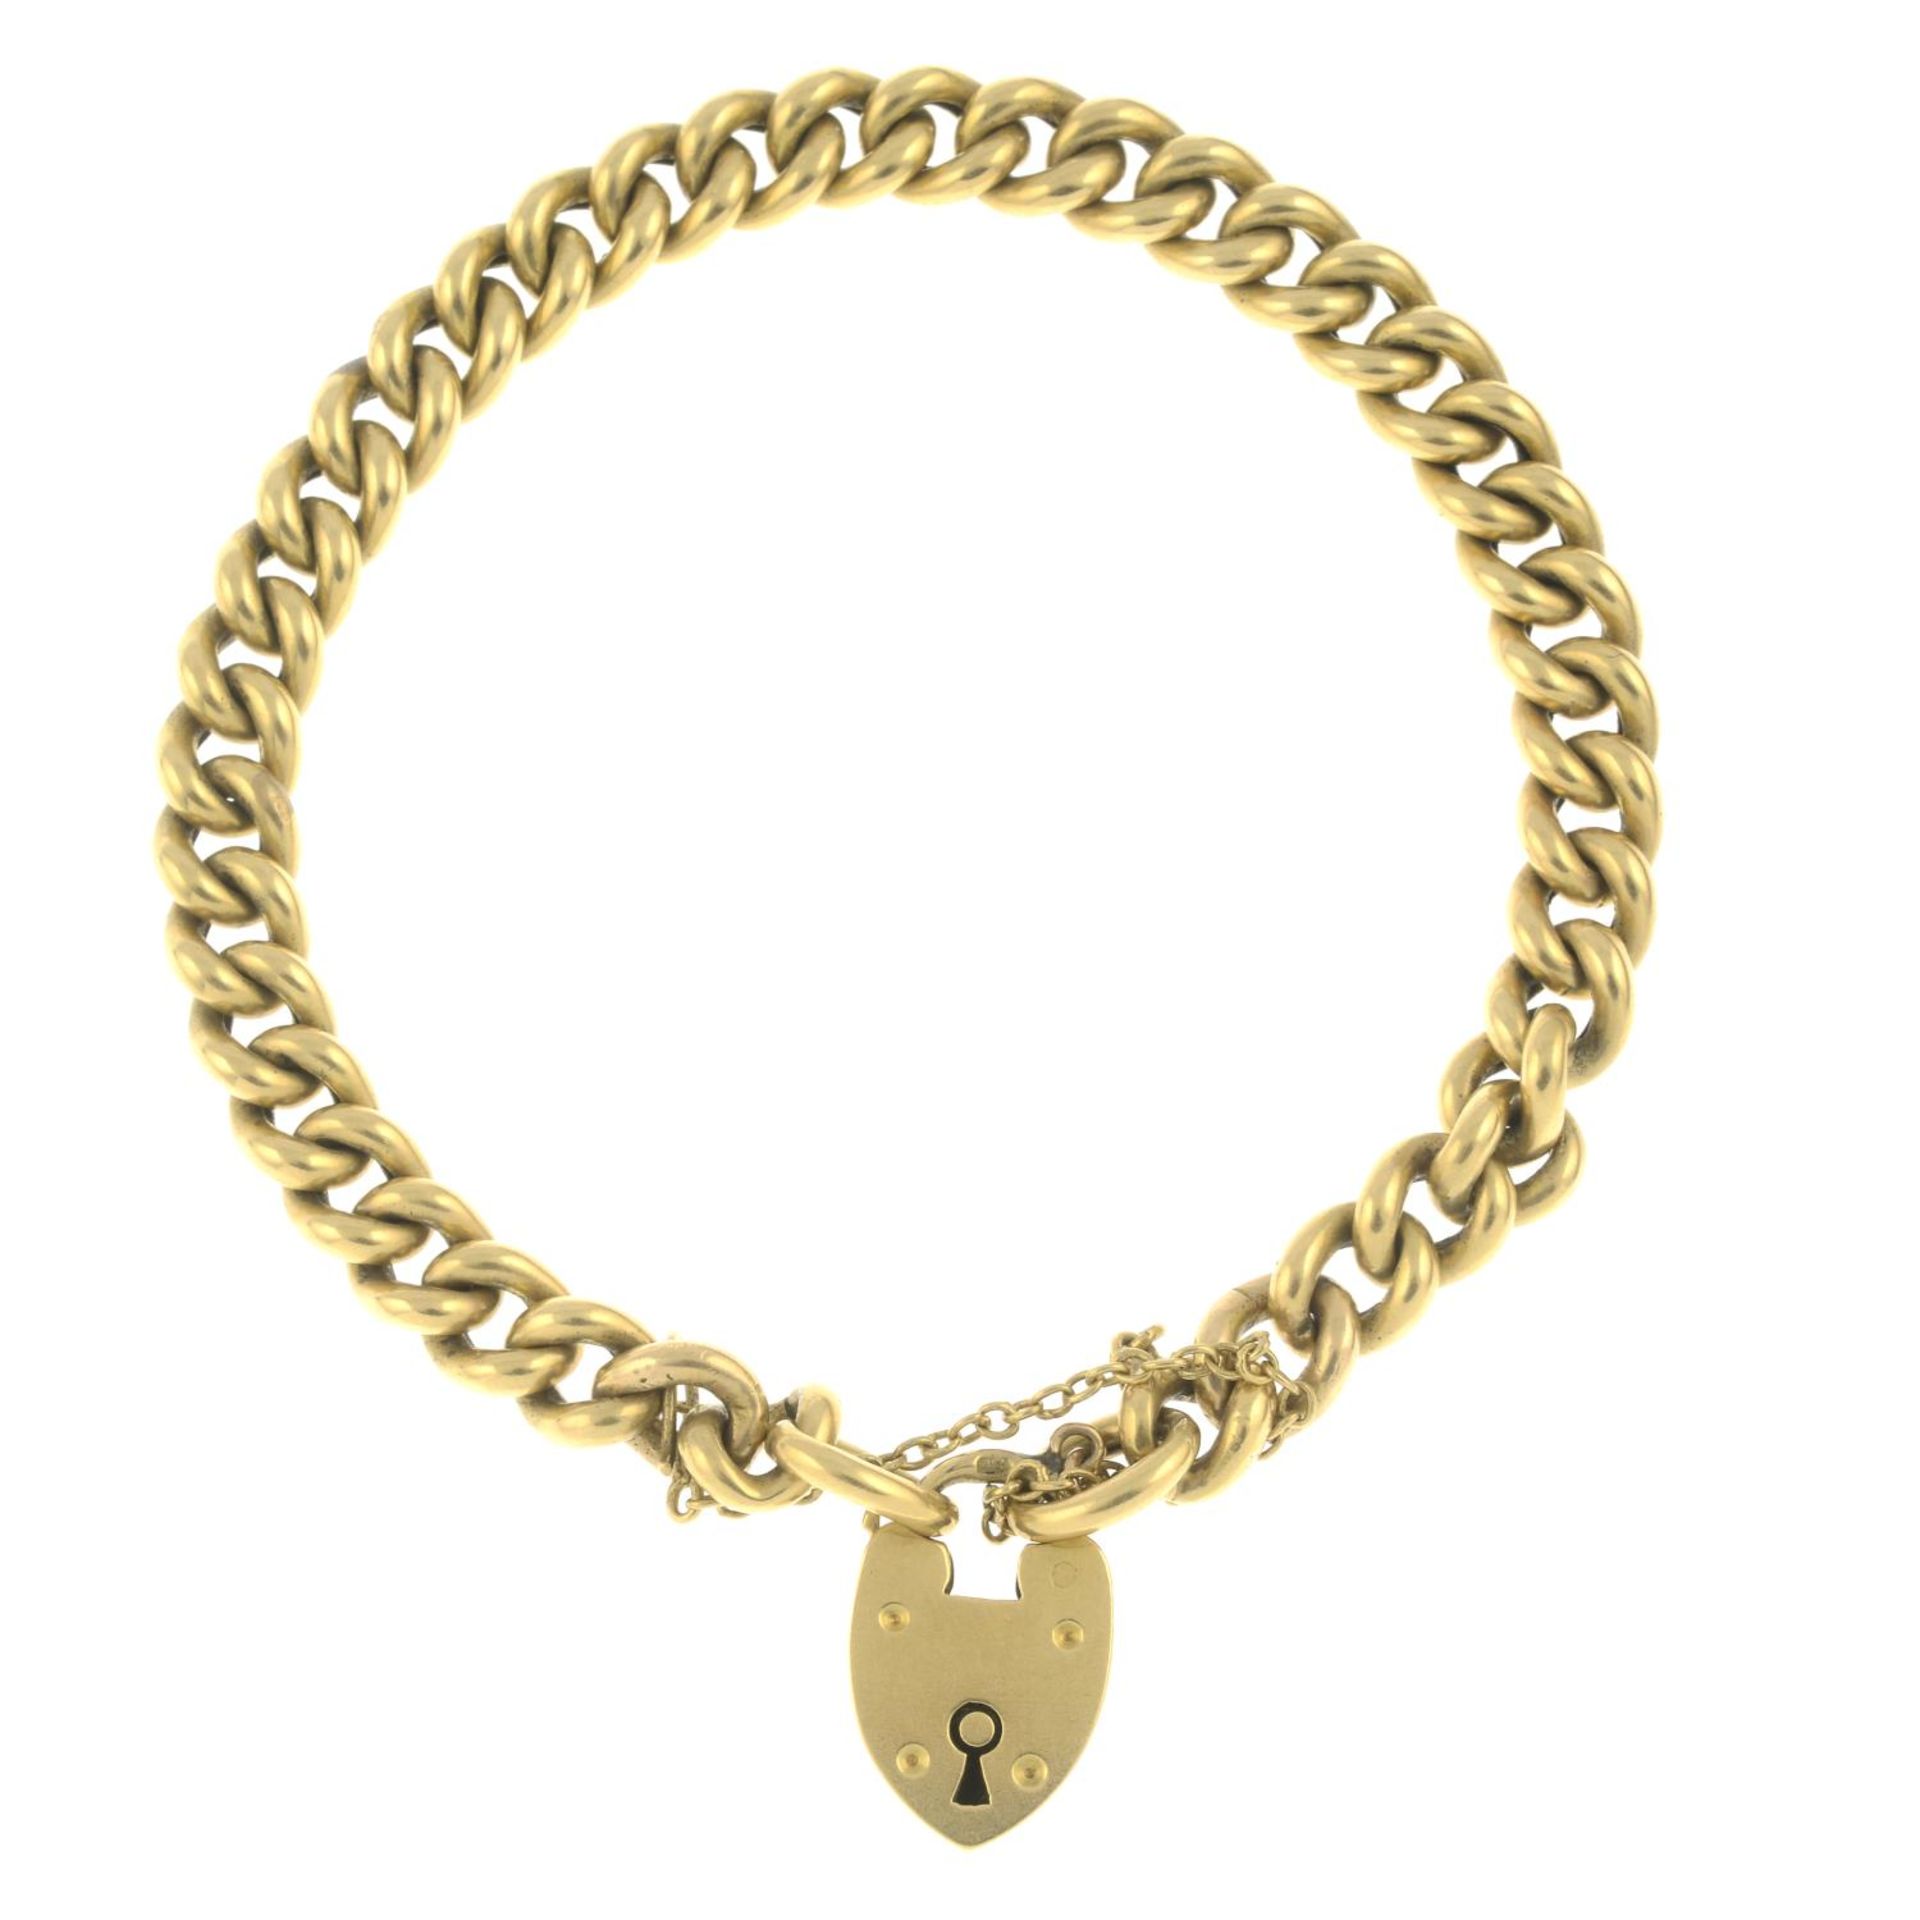 An early 20th century 18ct gold curb-link bracelet,